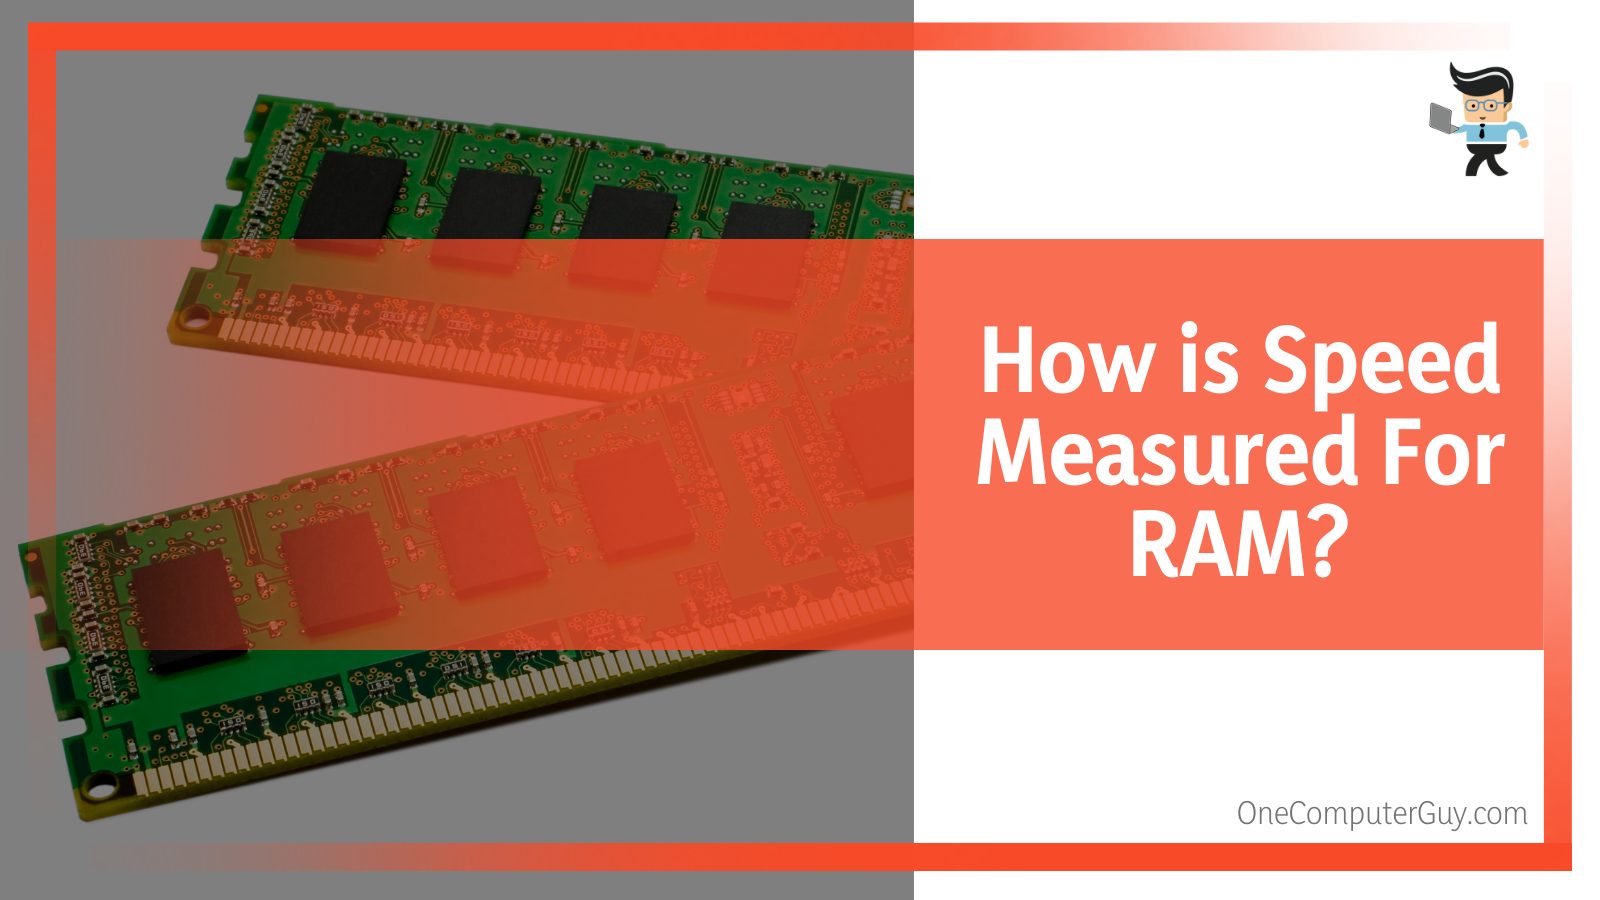 How is Speed Measured For RAM